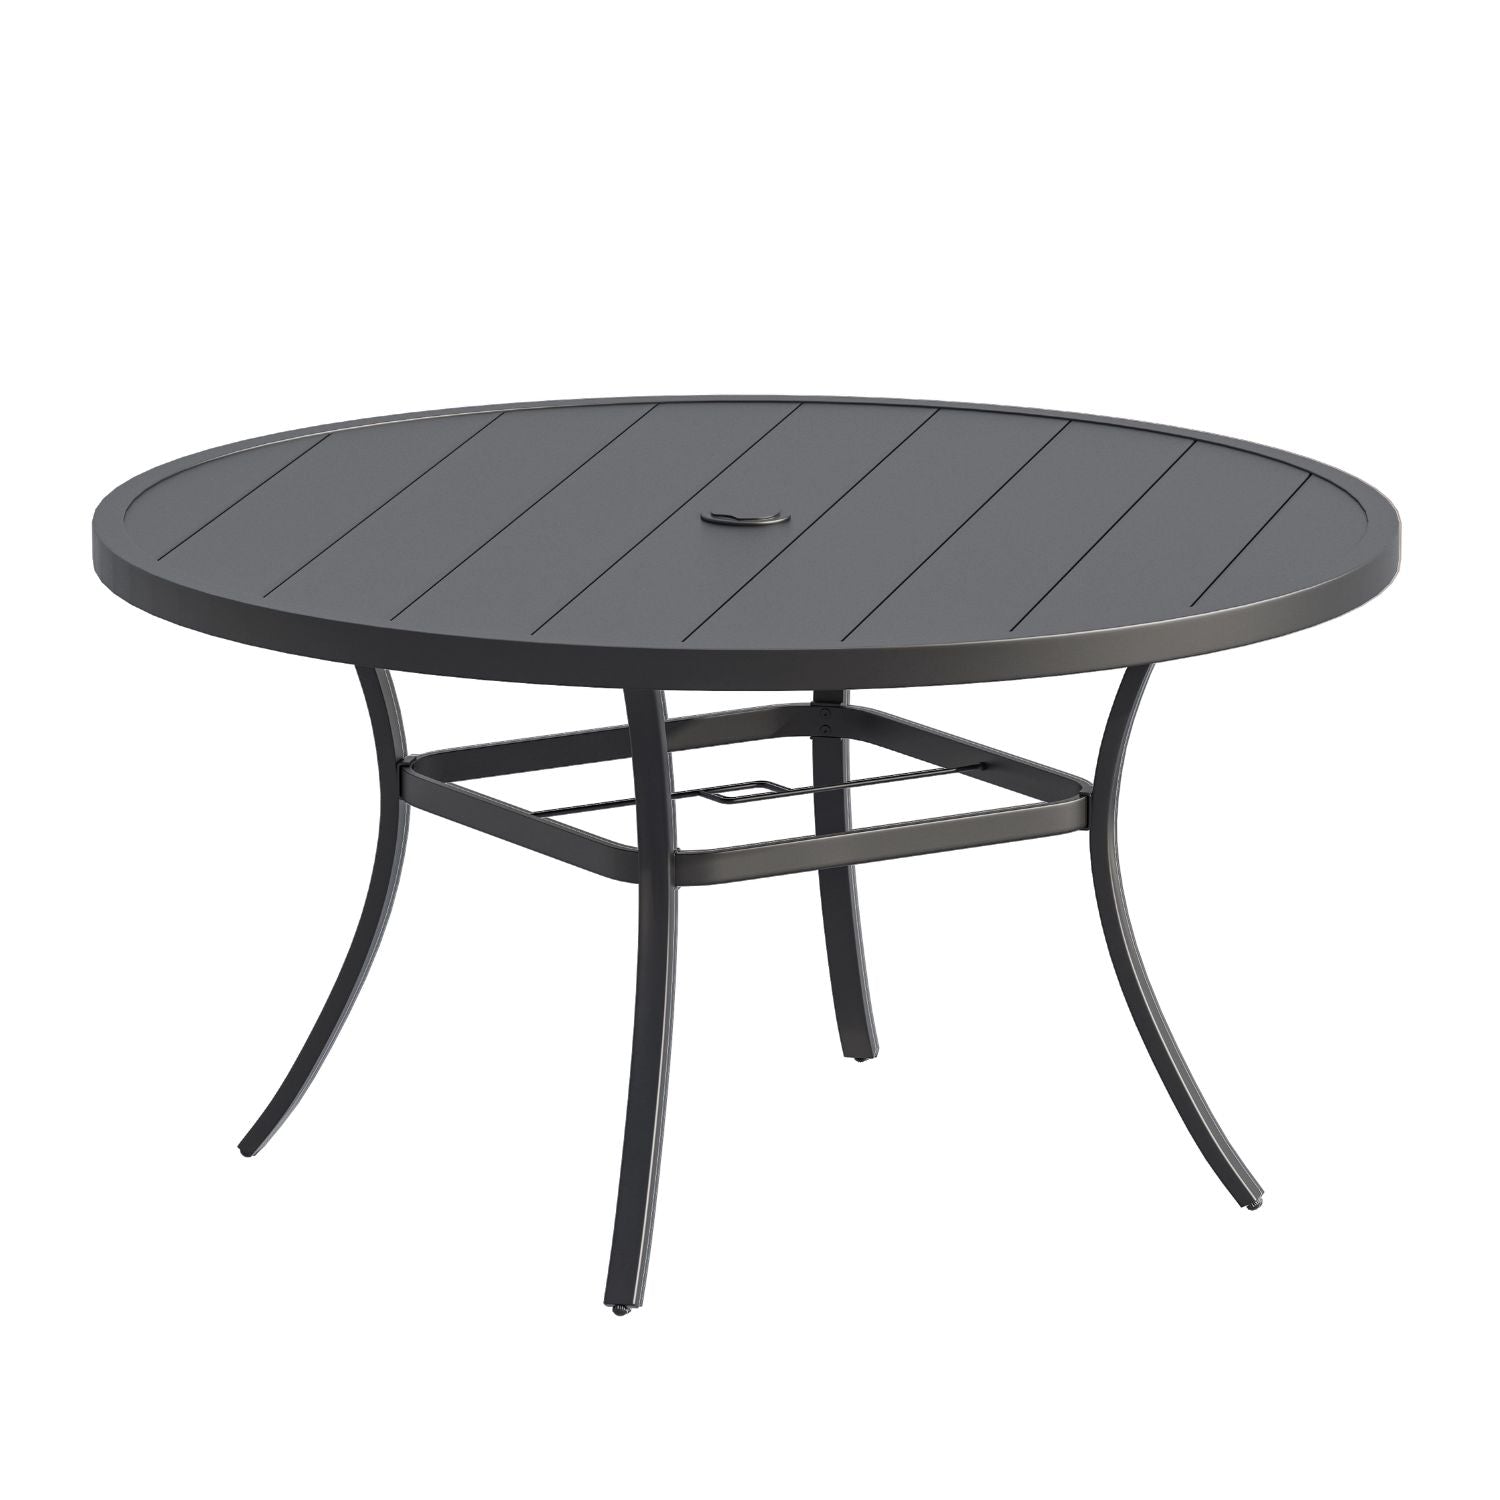 Vicllax 54" Outdoor Round Metal Dining Table with Umbrella Hole for 6, 8